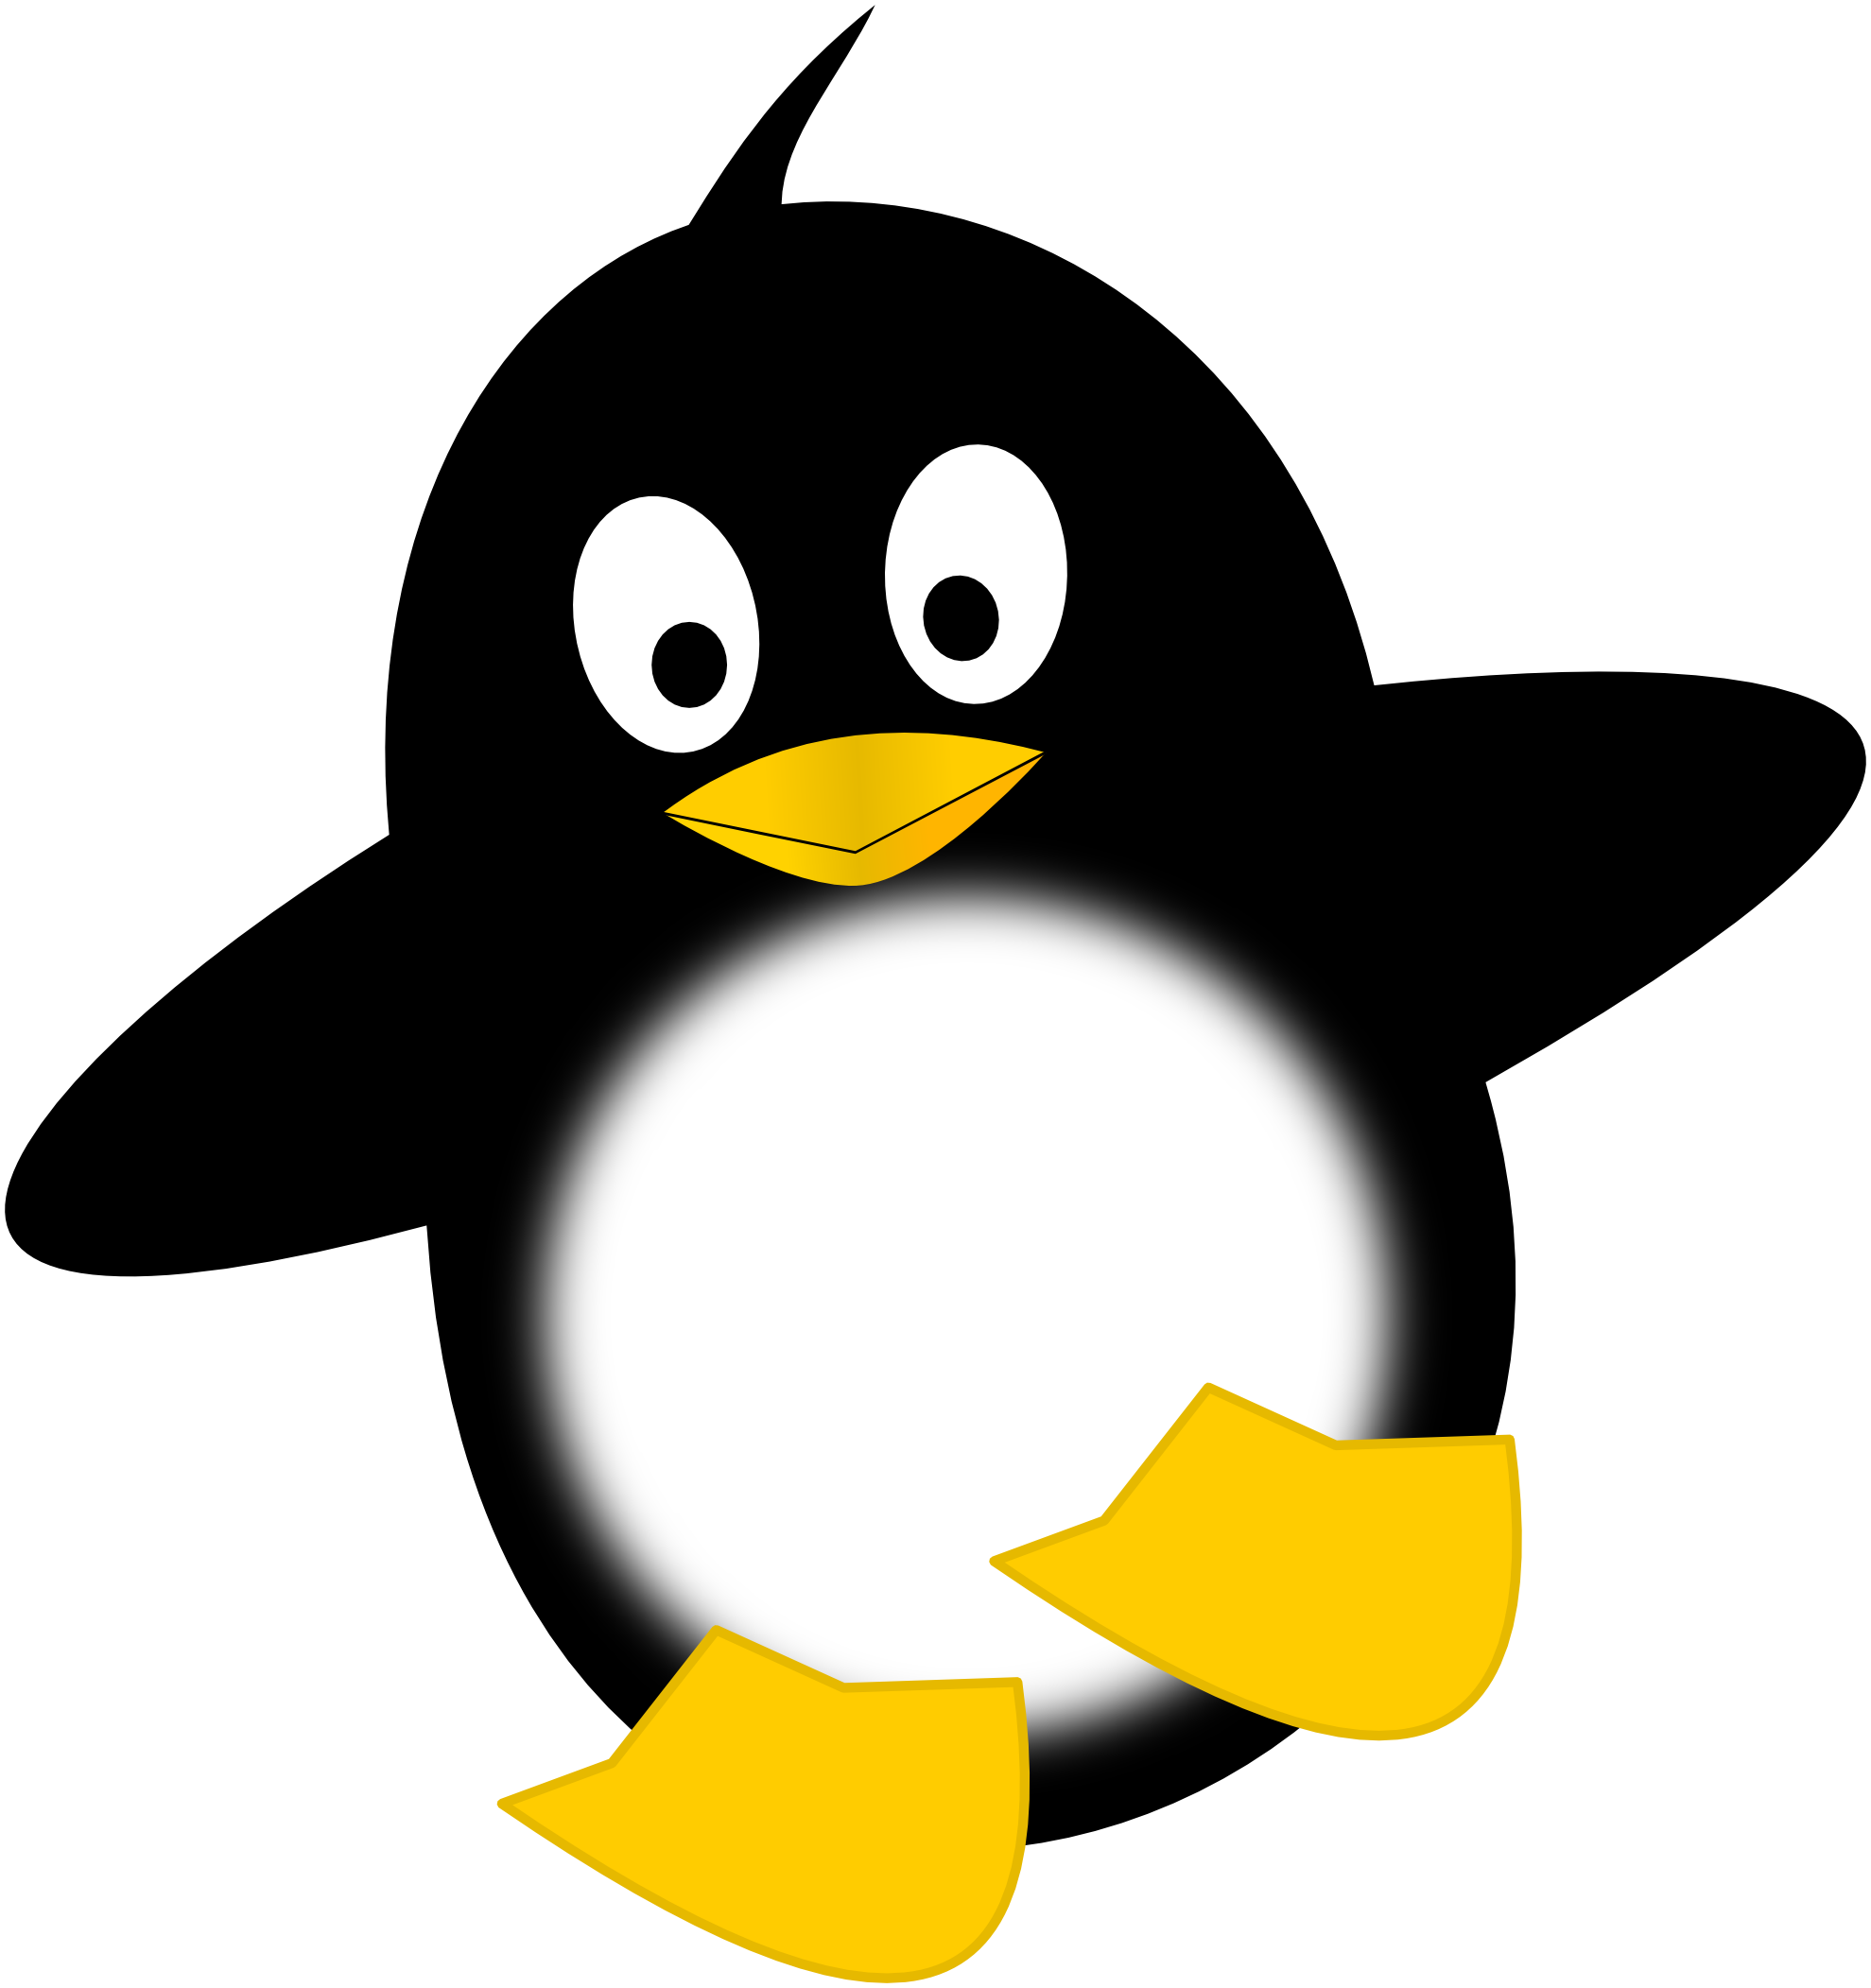 Penguins - Clipart library